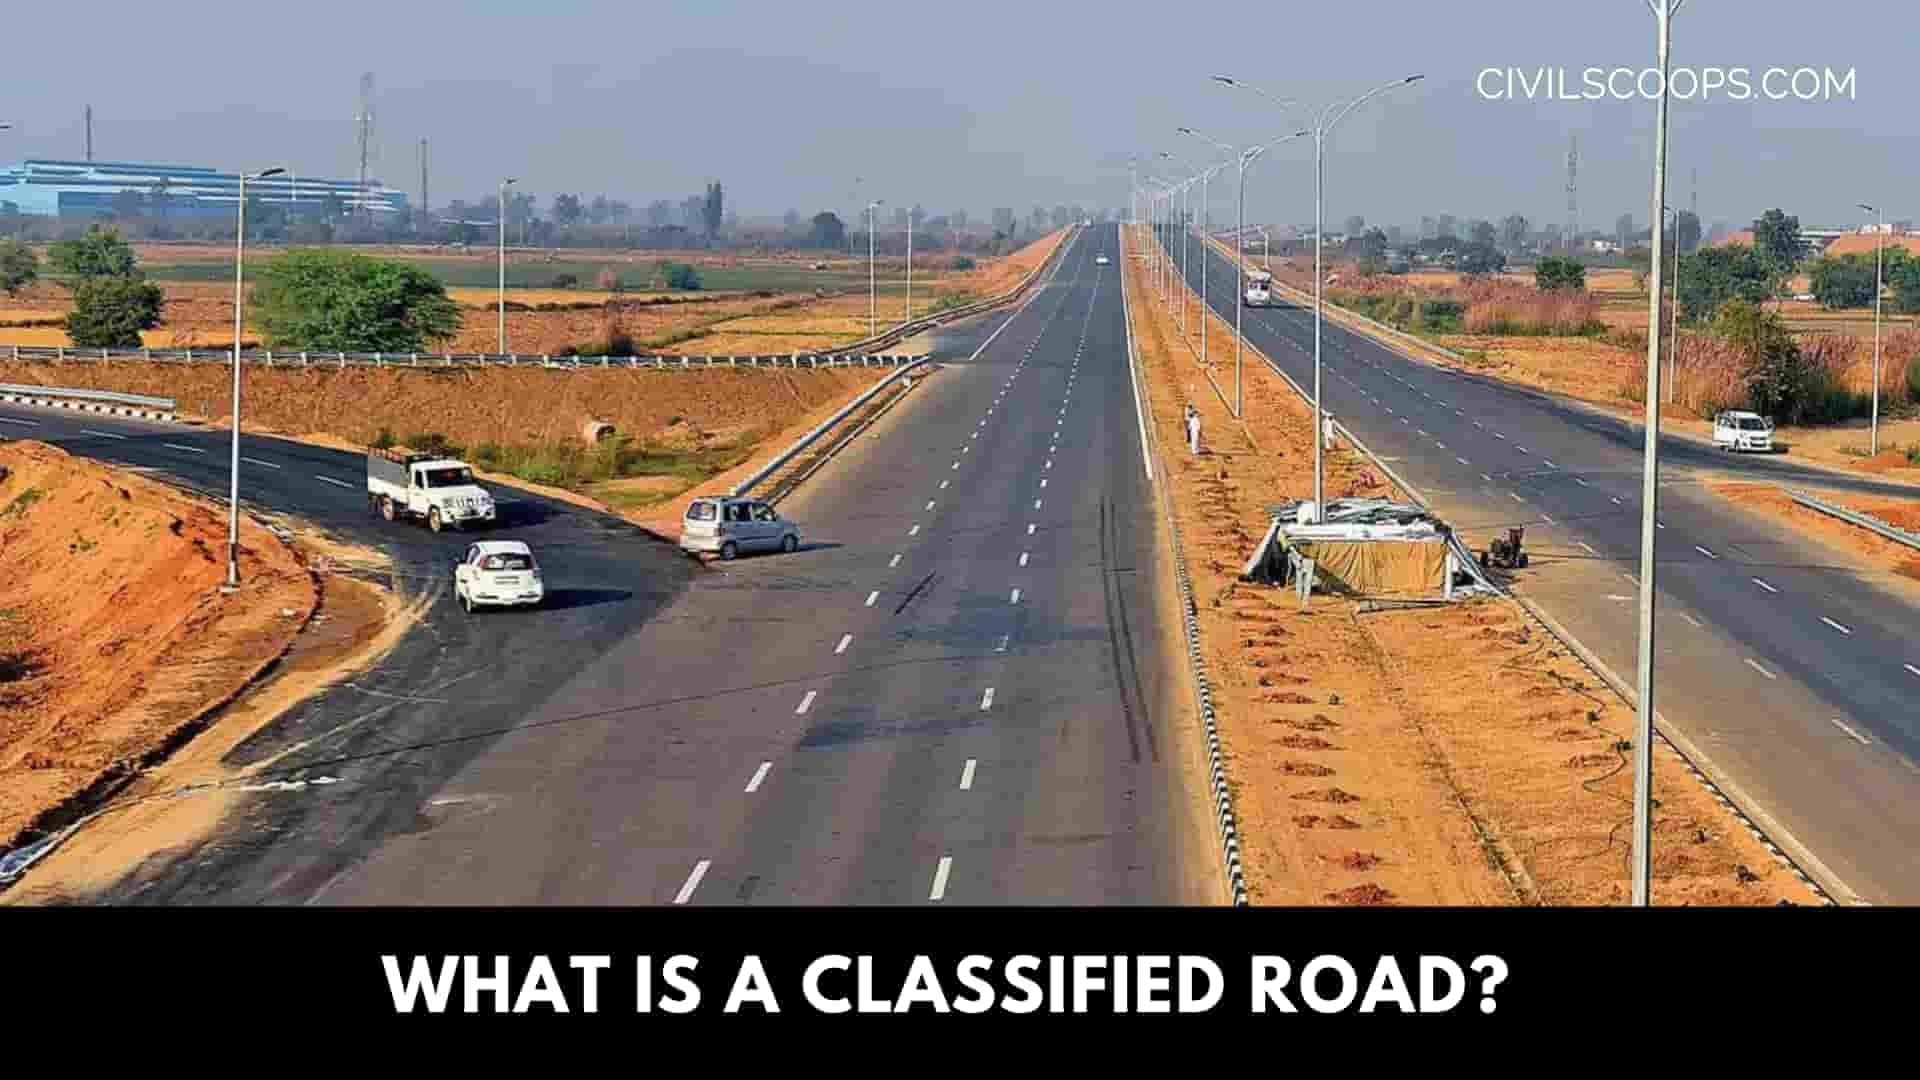 What Is a Classified Road?